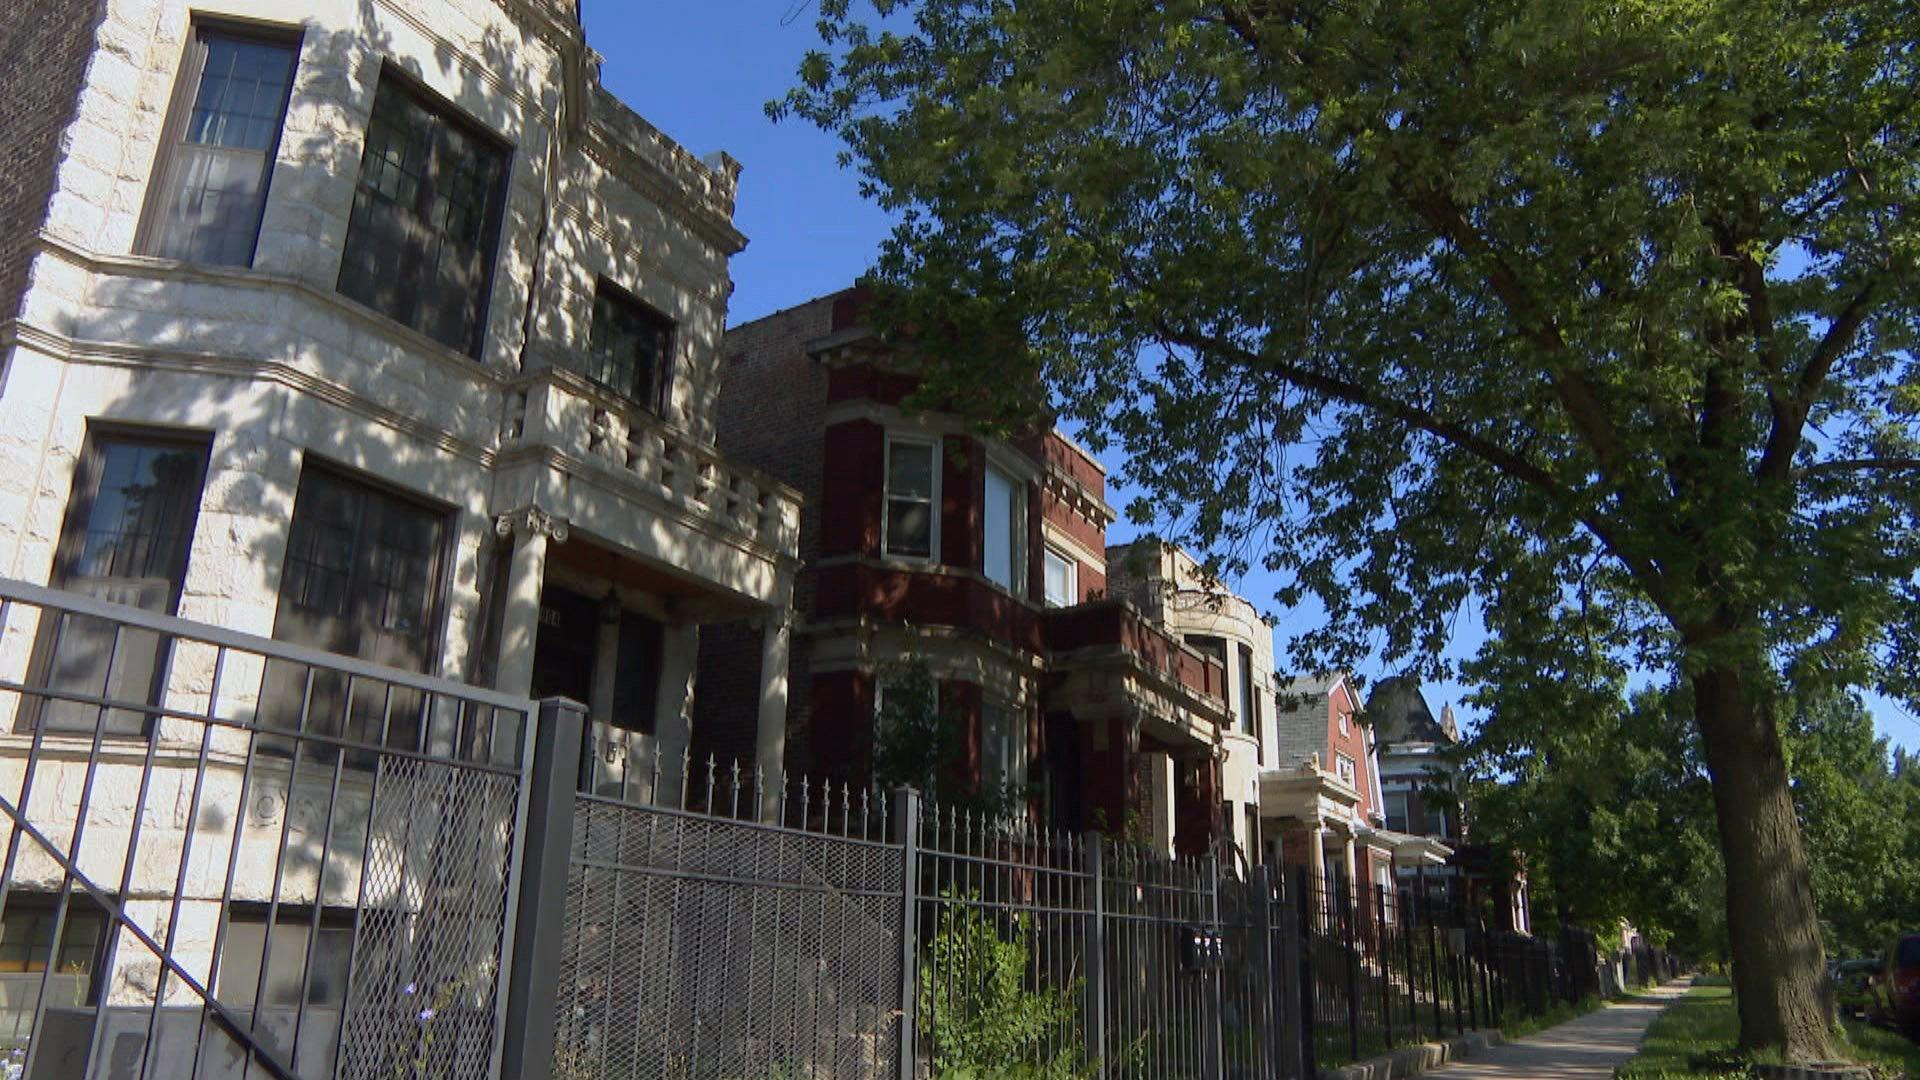 In this file photo, houses sit behind metal fencing on a tree-lined street in Chicago. (WTTW News)